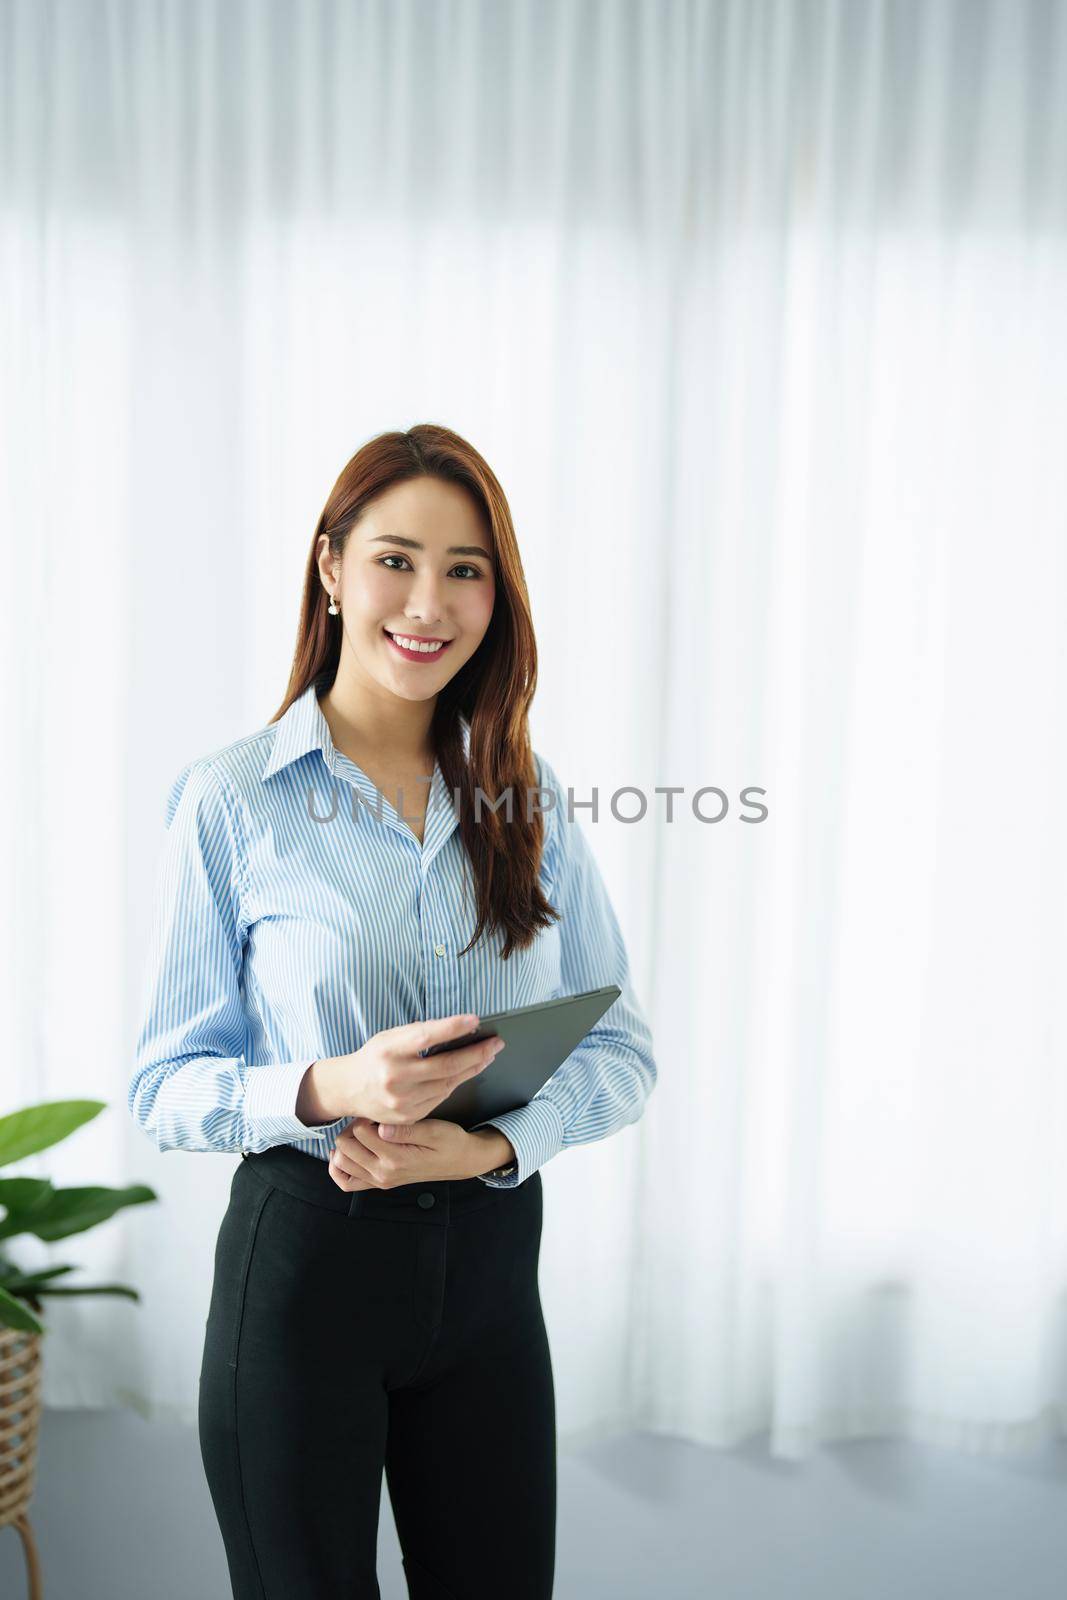 Entrepreneur, Business Owner, Accountant, Portrait of Starting small businesses Asians holding a smiling tablet in the office. by Manastrong